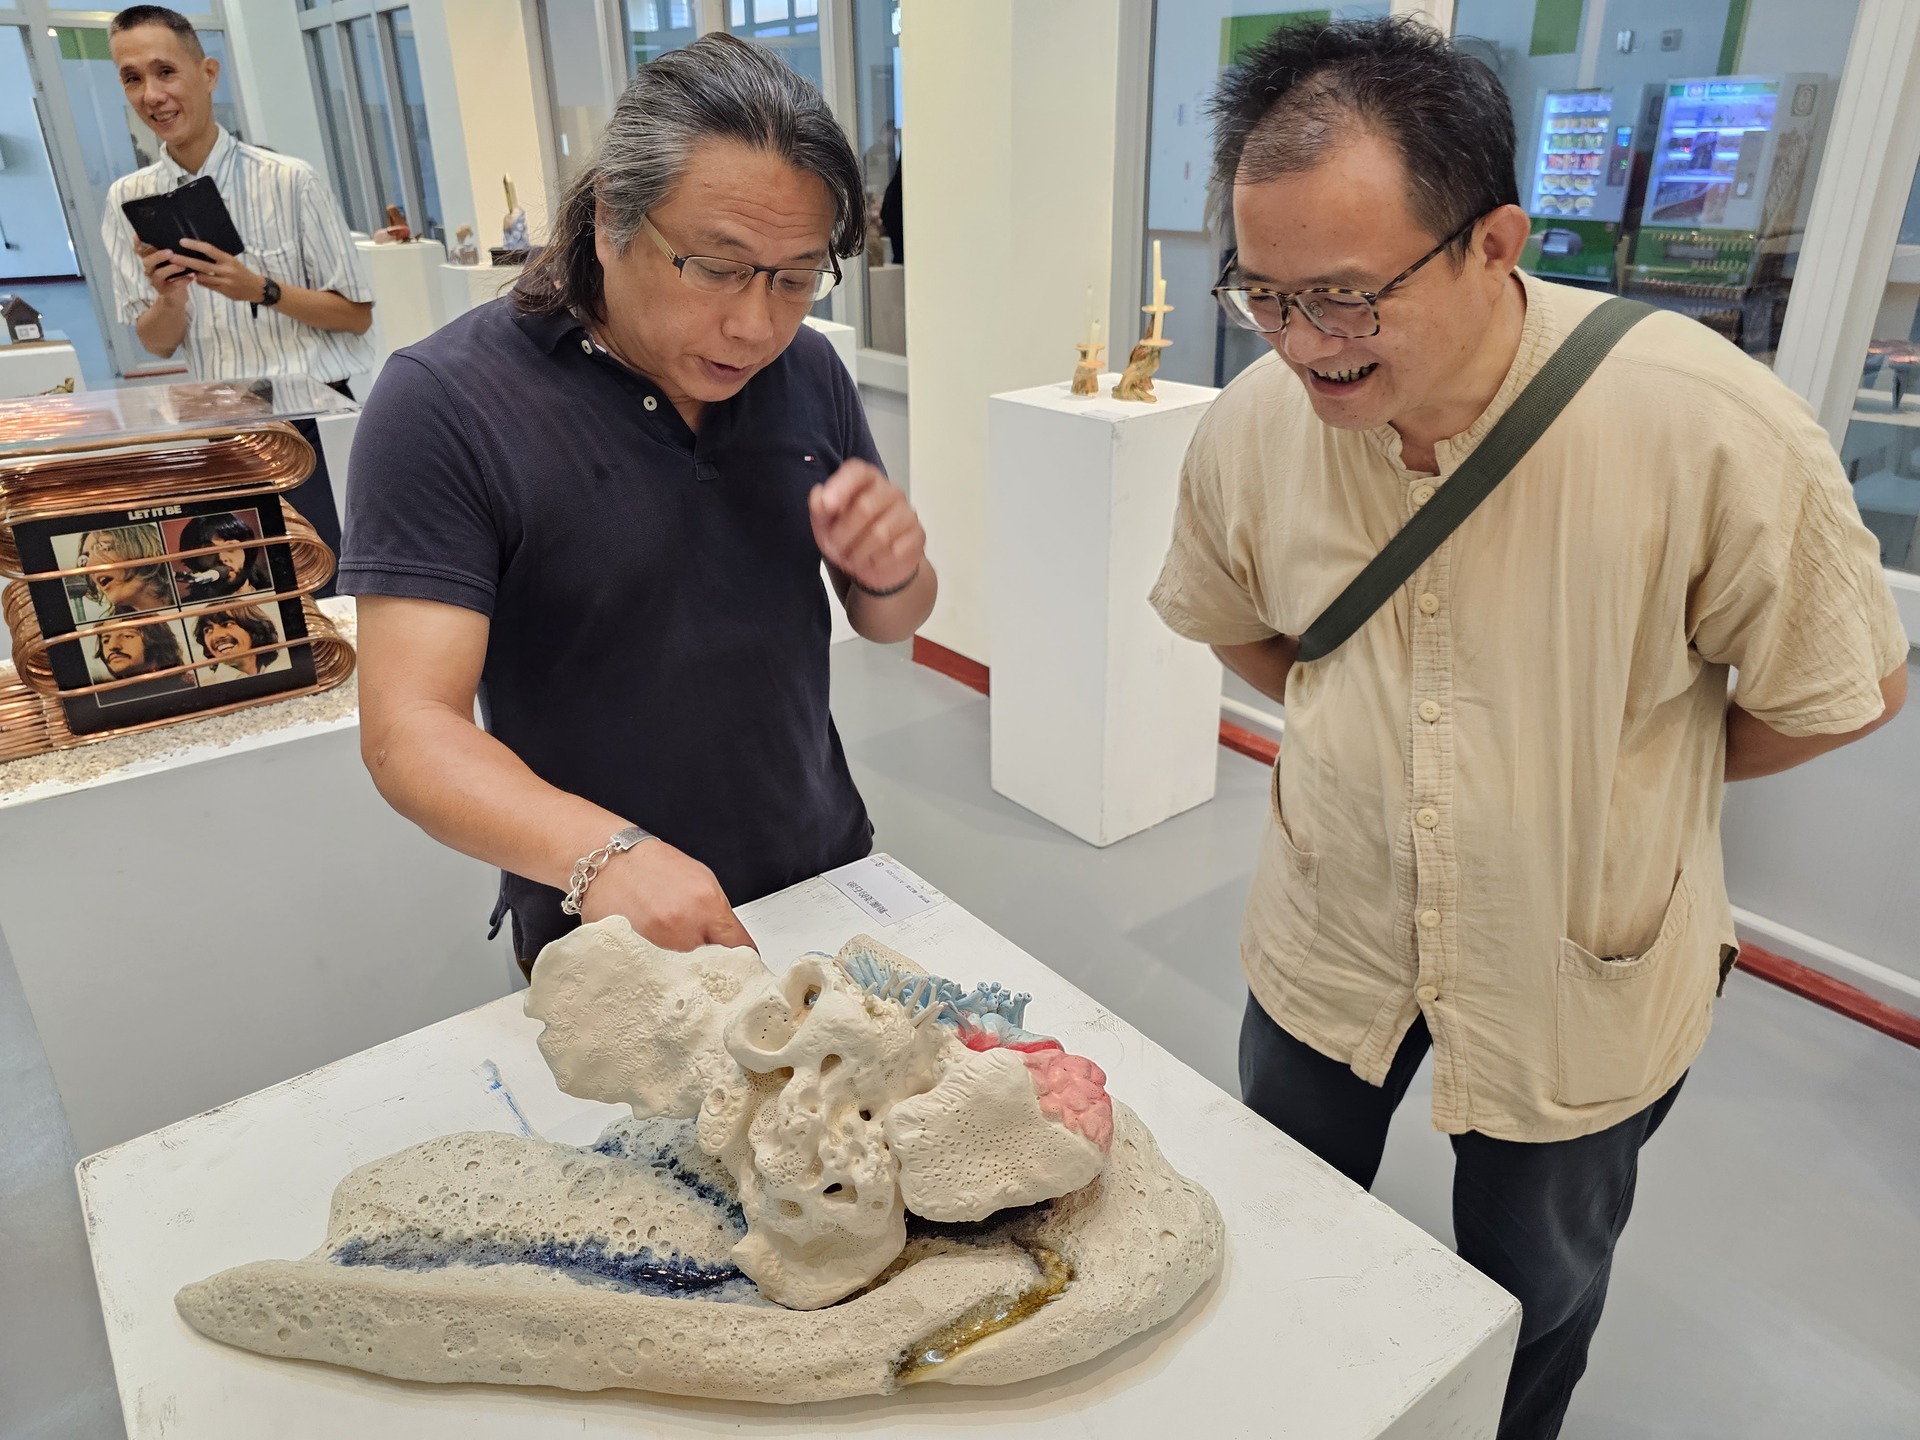 At the Open Day, Professor Guan-Xun Chen, Director of the Department of Crafts and Creative Design, leads the "Pottery Handcrafting" session.